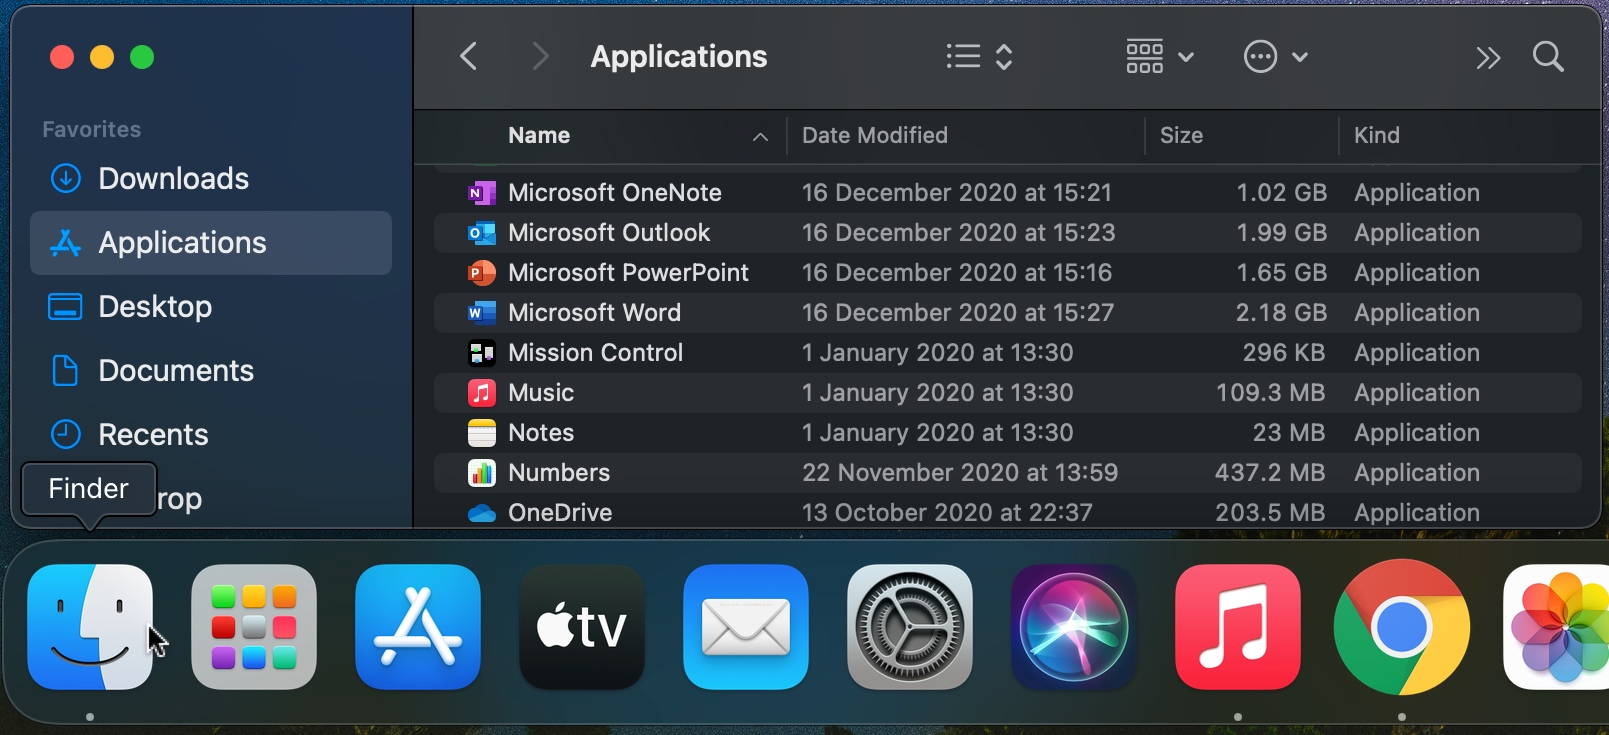 Delete Apps From MAC